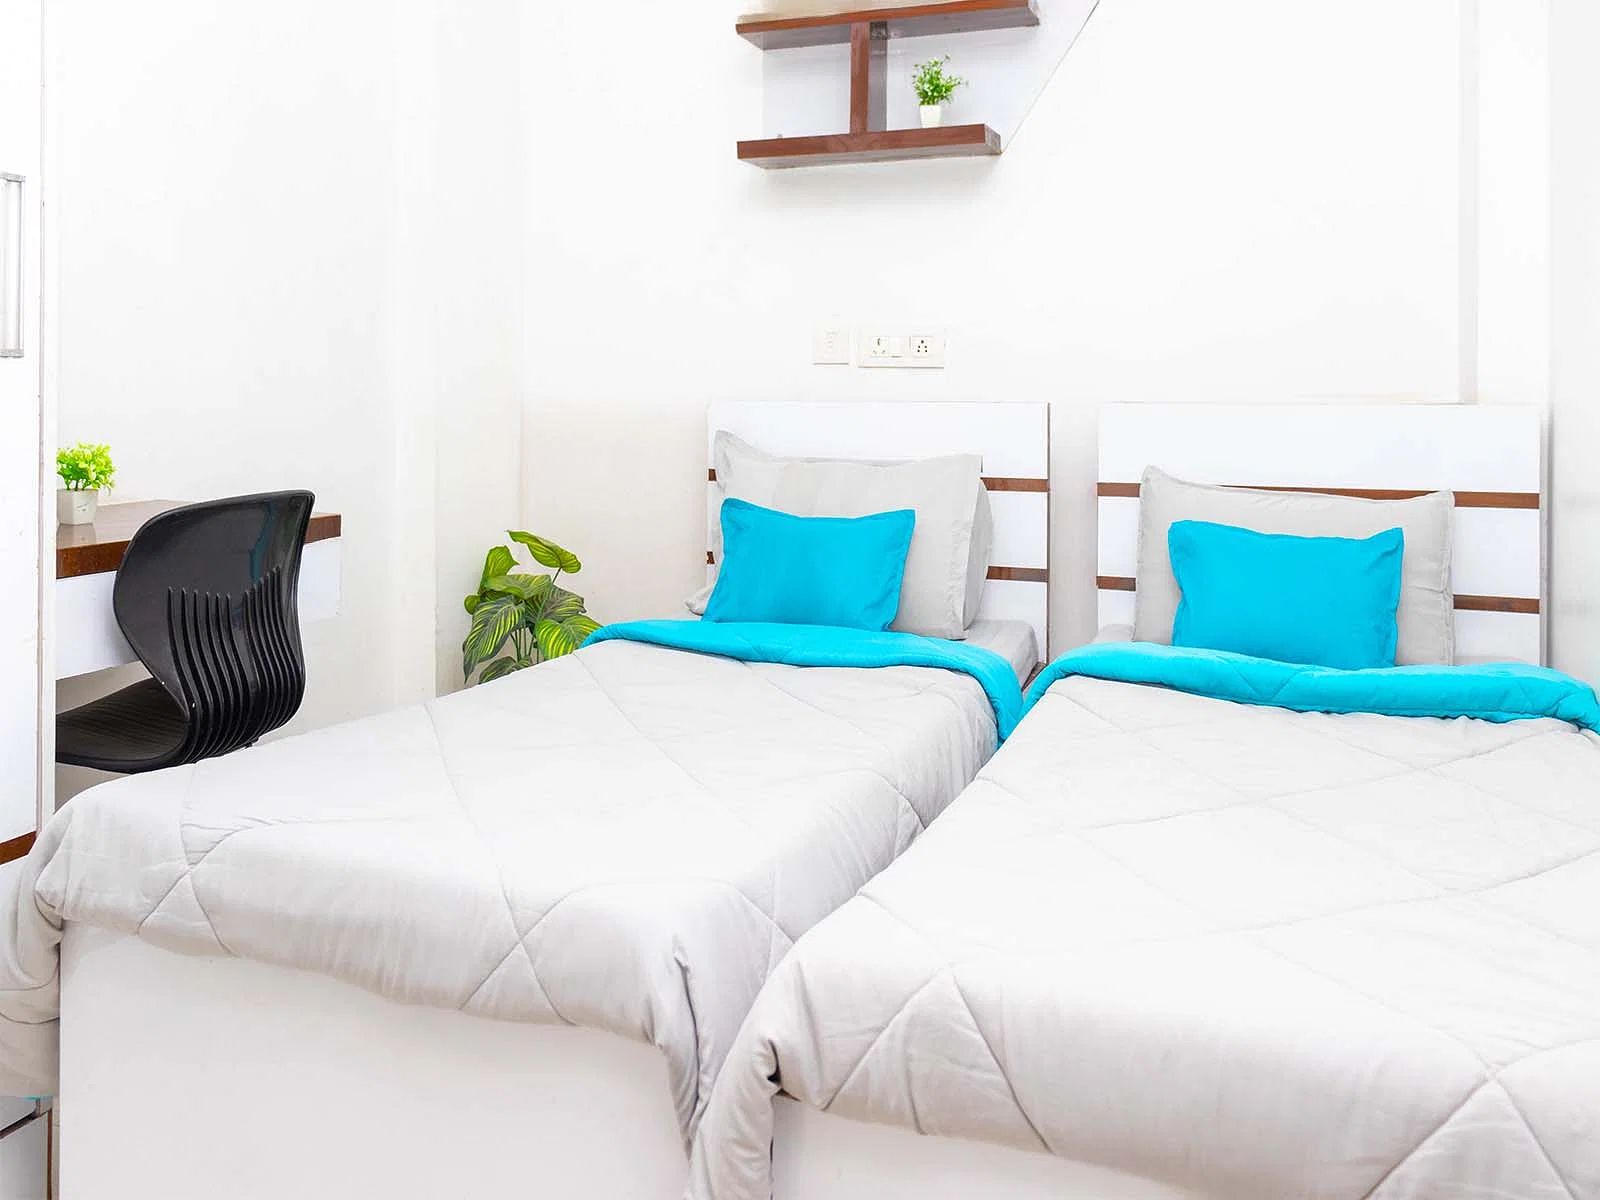 pgs in Sec 126 Noida with Daily housekeeping facilities and free Wi-Fi-Zolo Astrix